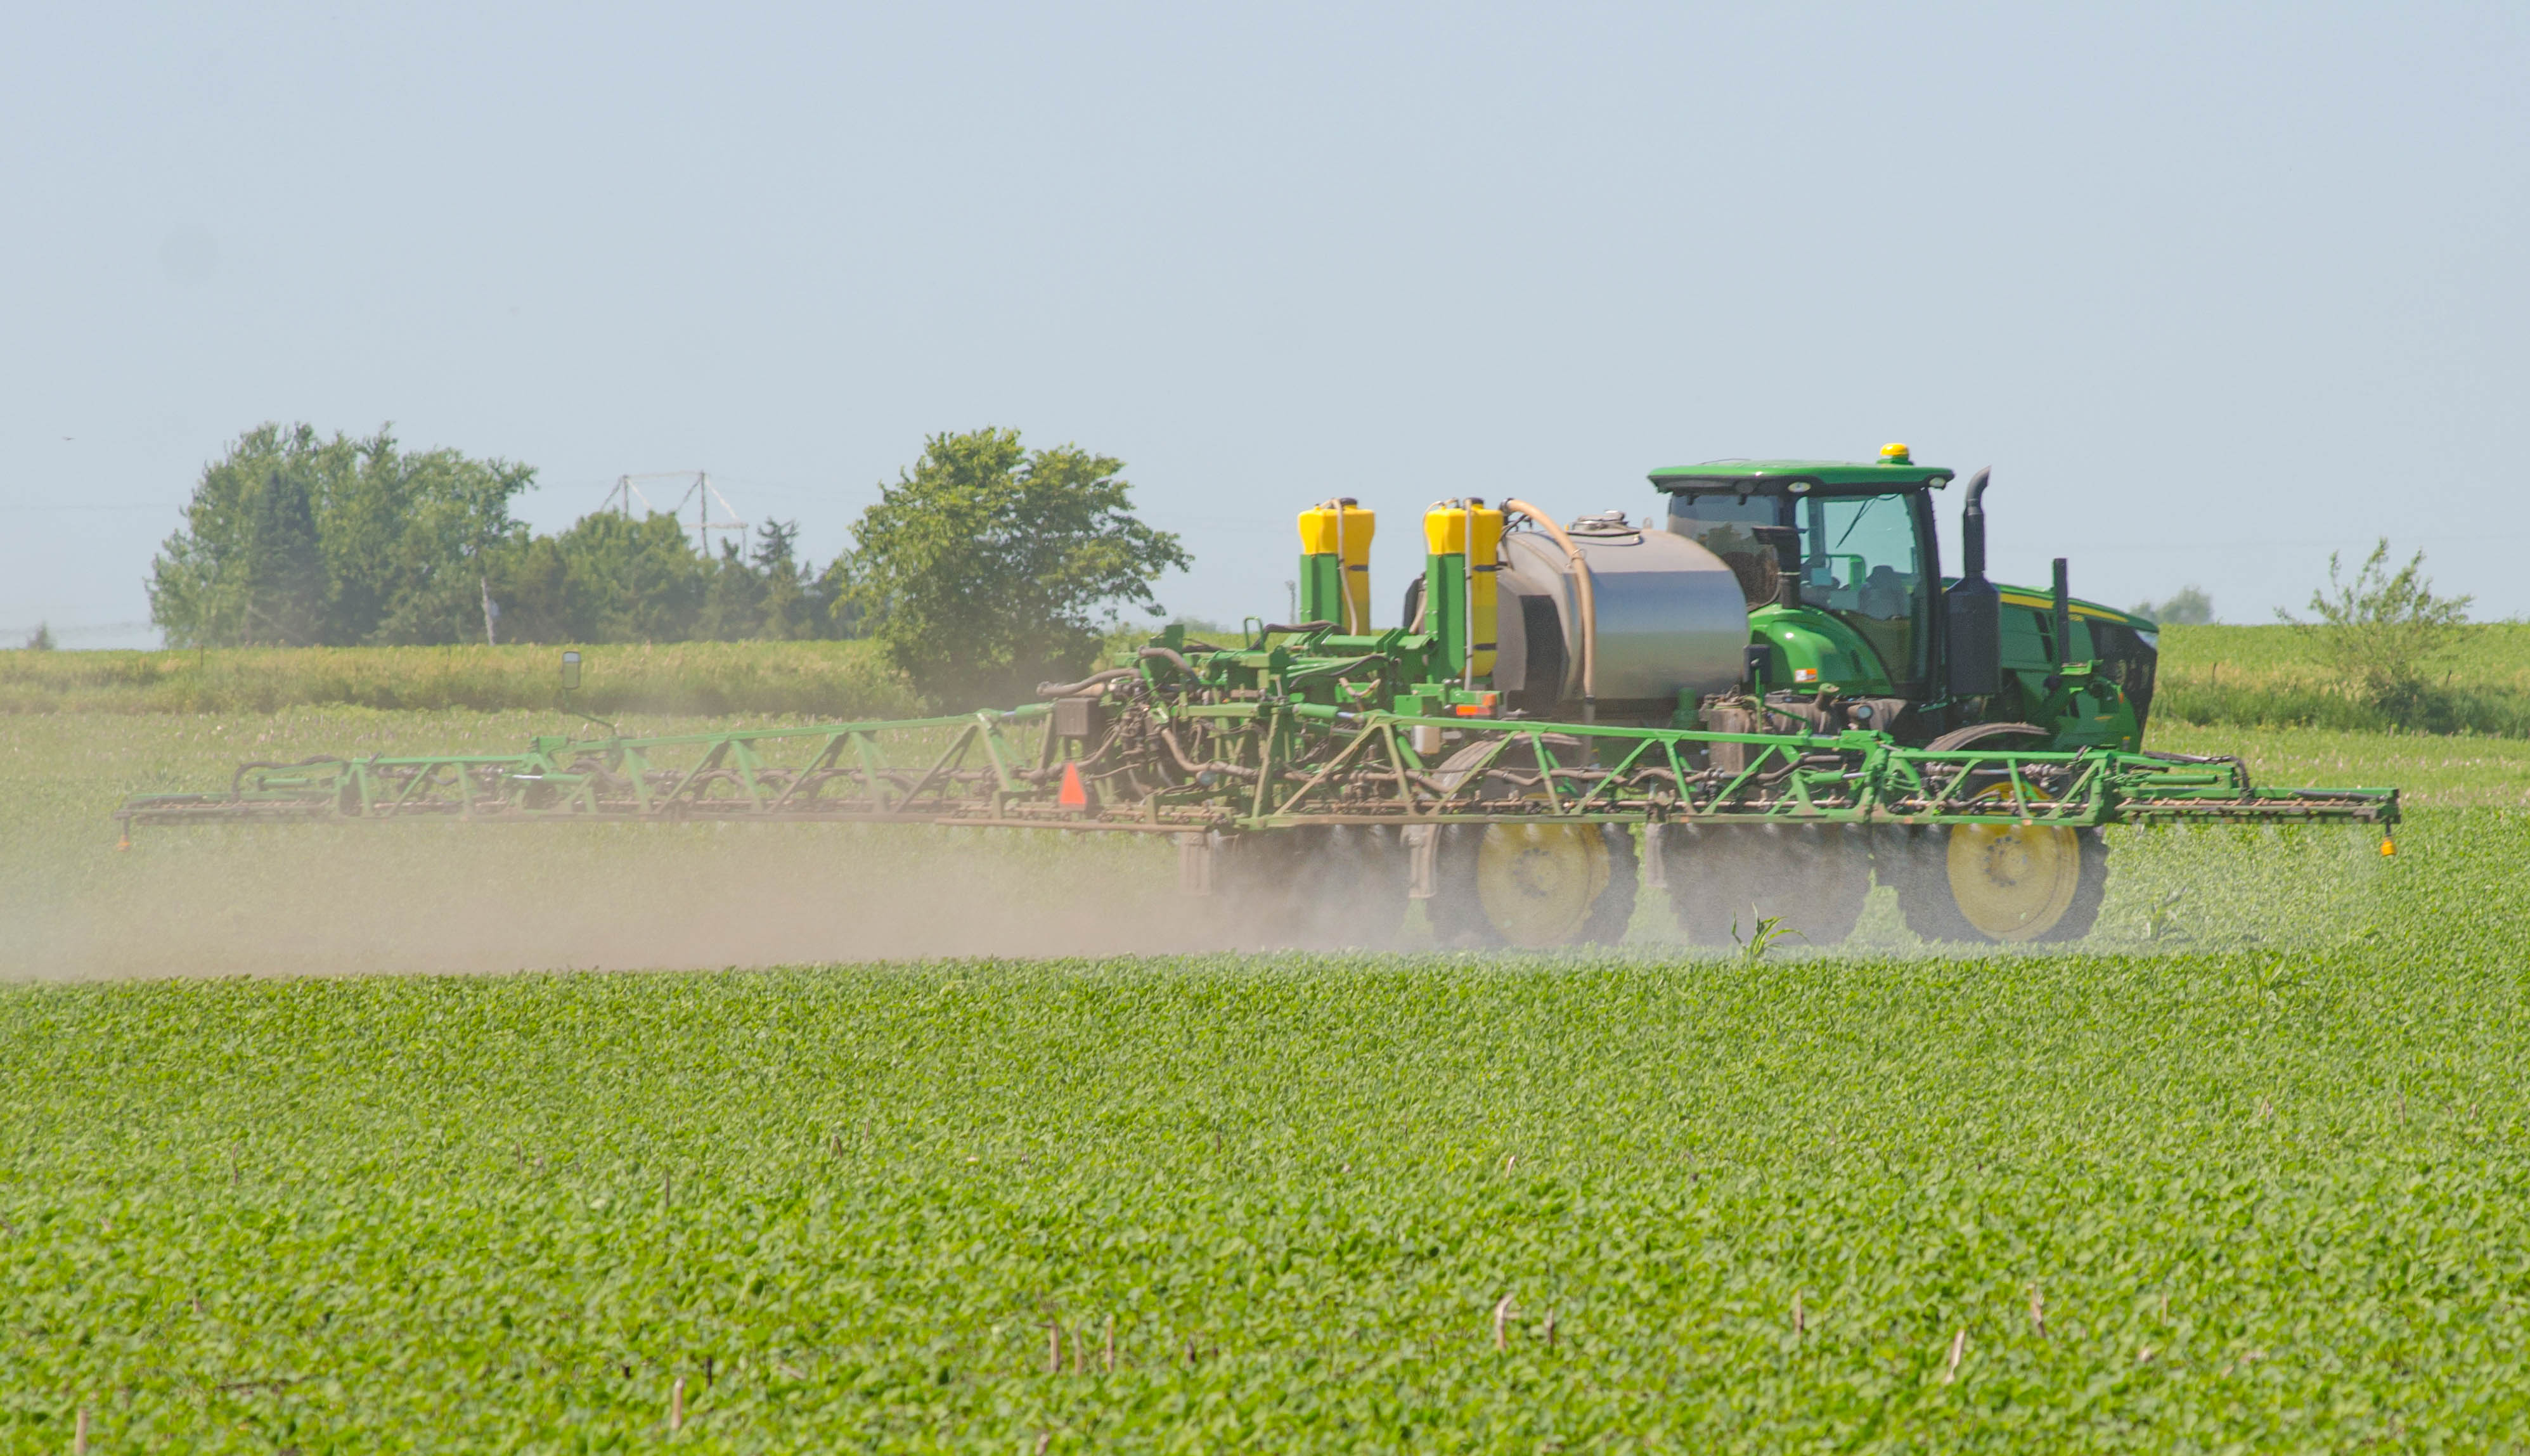 Soybeans being sprayed by John Deere tractor